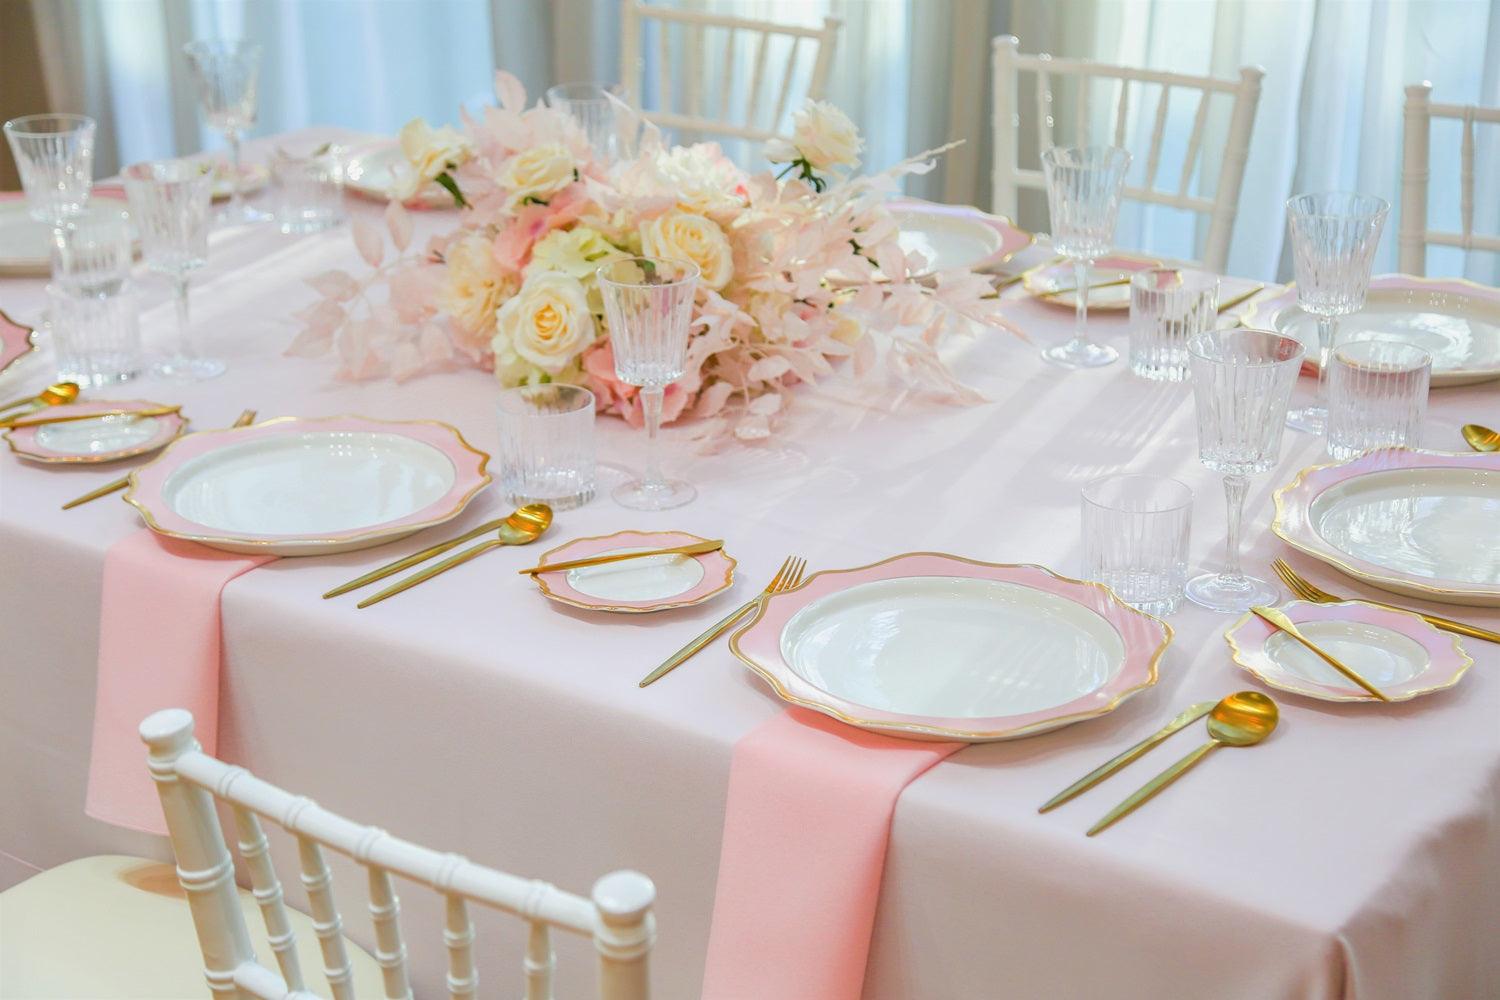 Pink Elegance table setup with plates, glasses, and centrepieces for a party of 8. Rent all party essentials from Party Social.